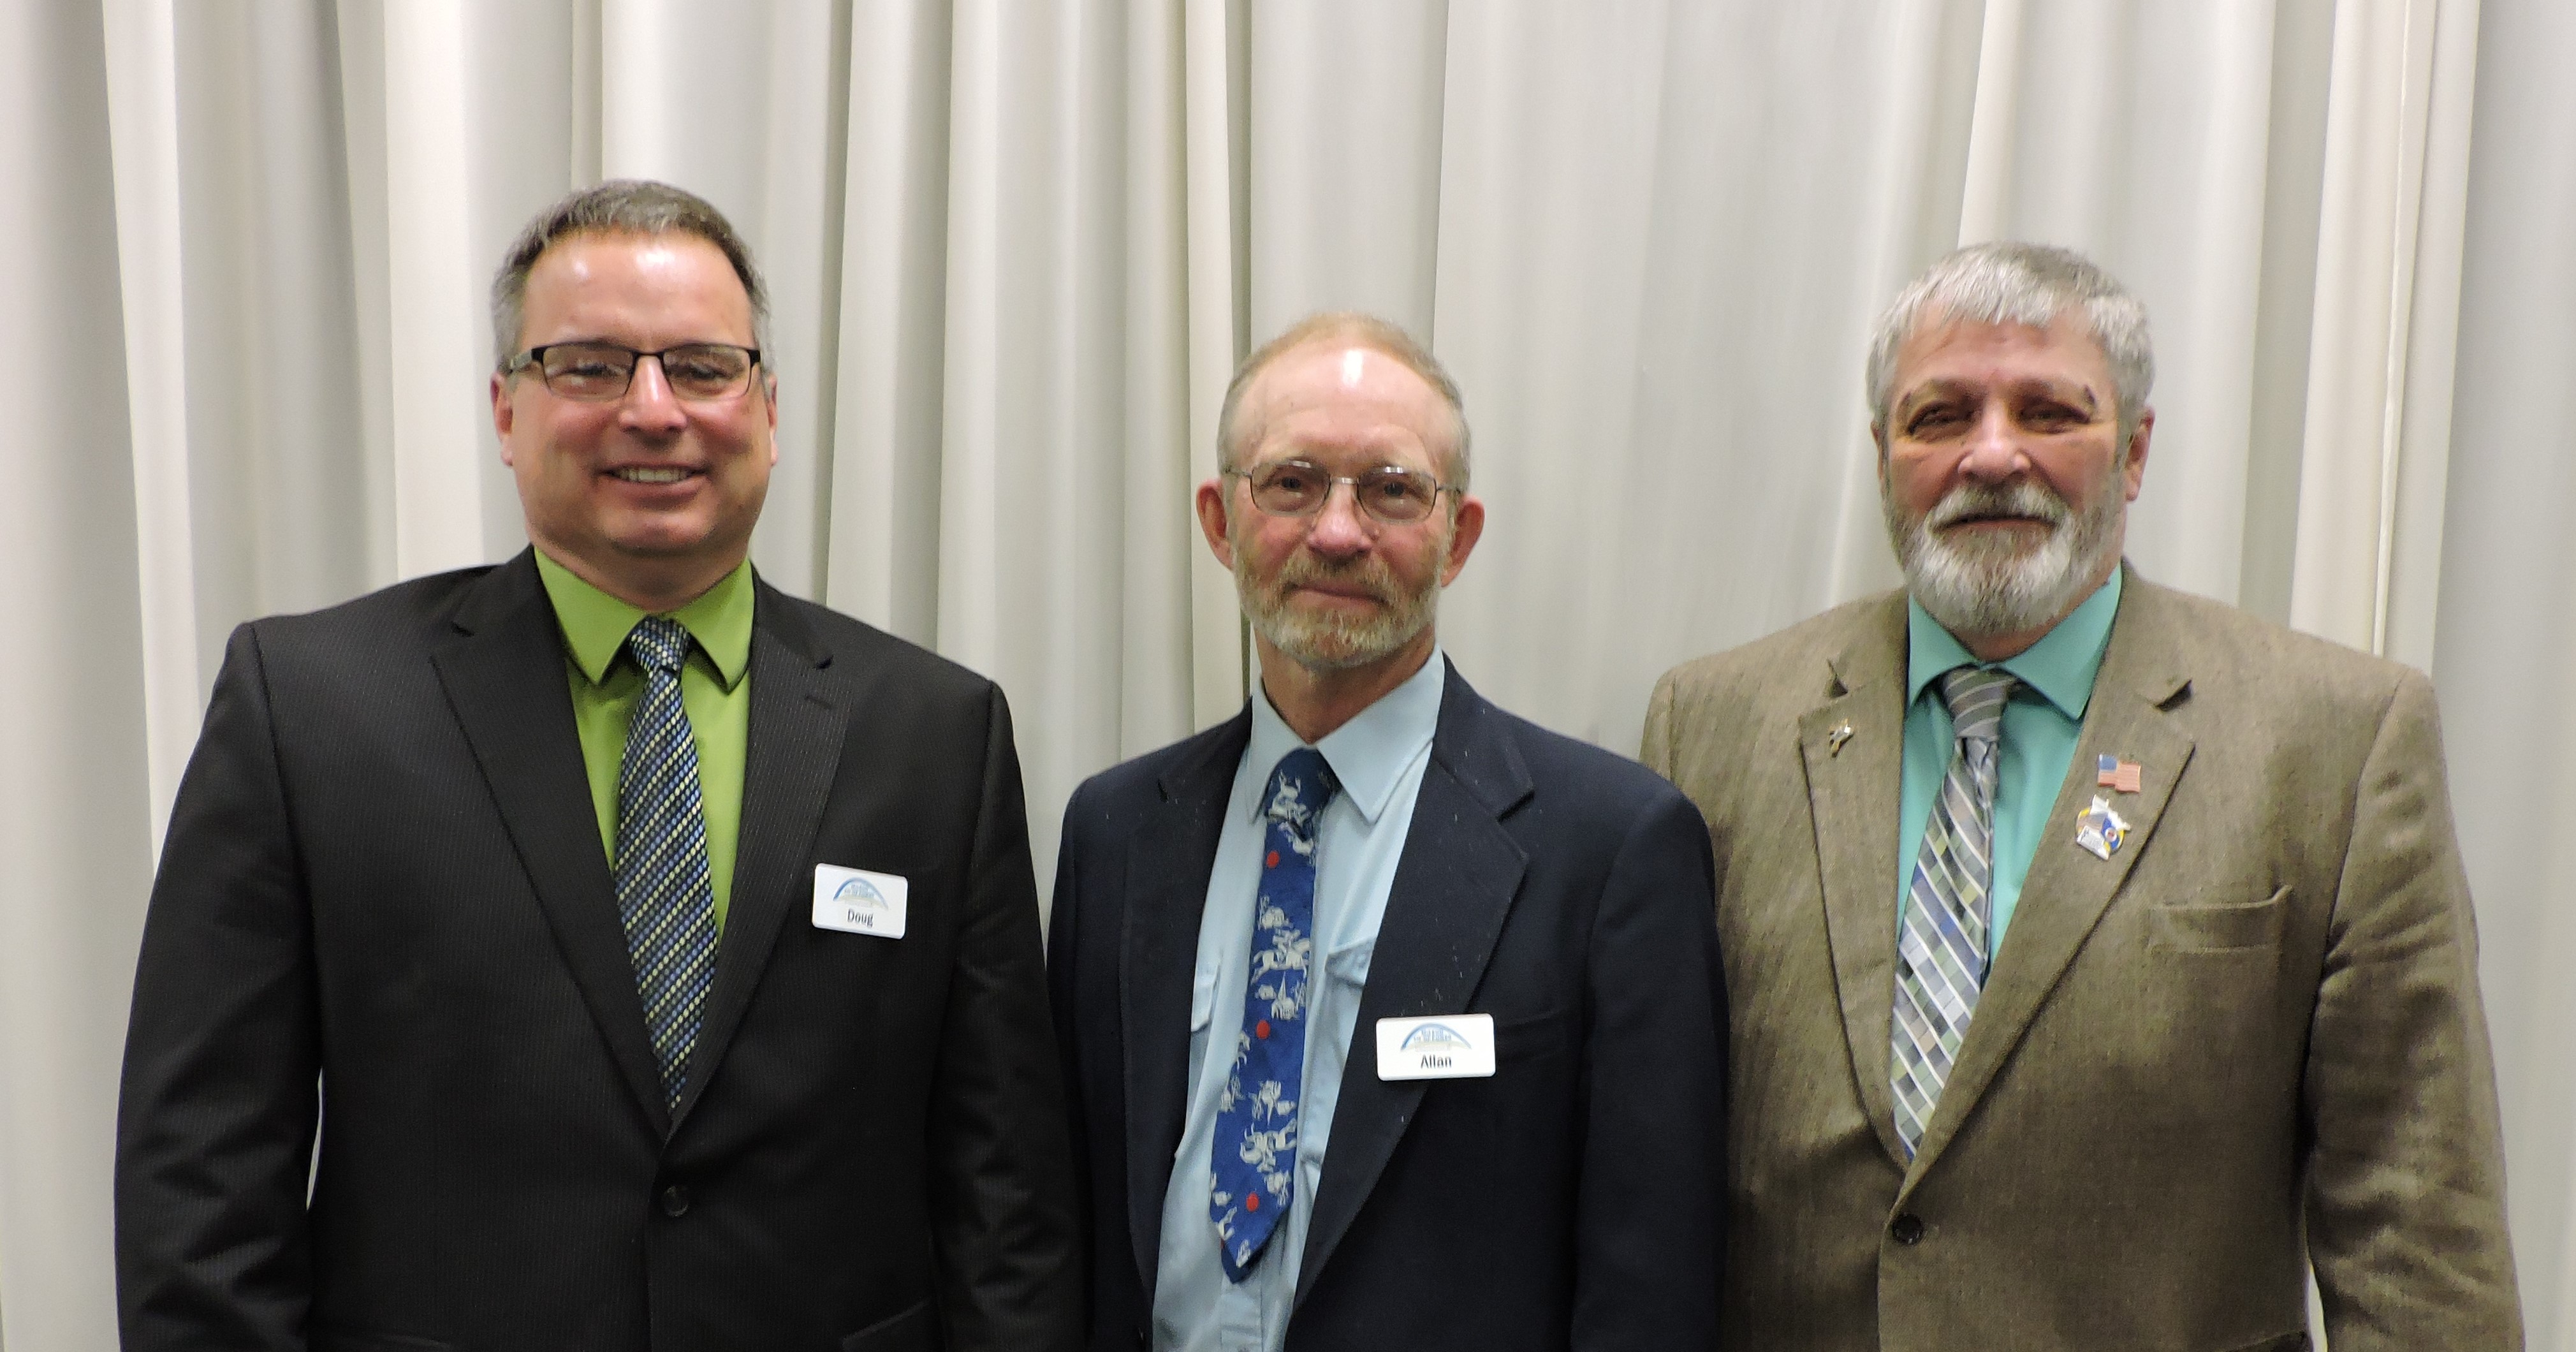 3 people are Newly elected McLeood Cooperative directors 2018